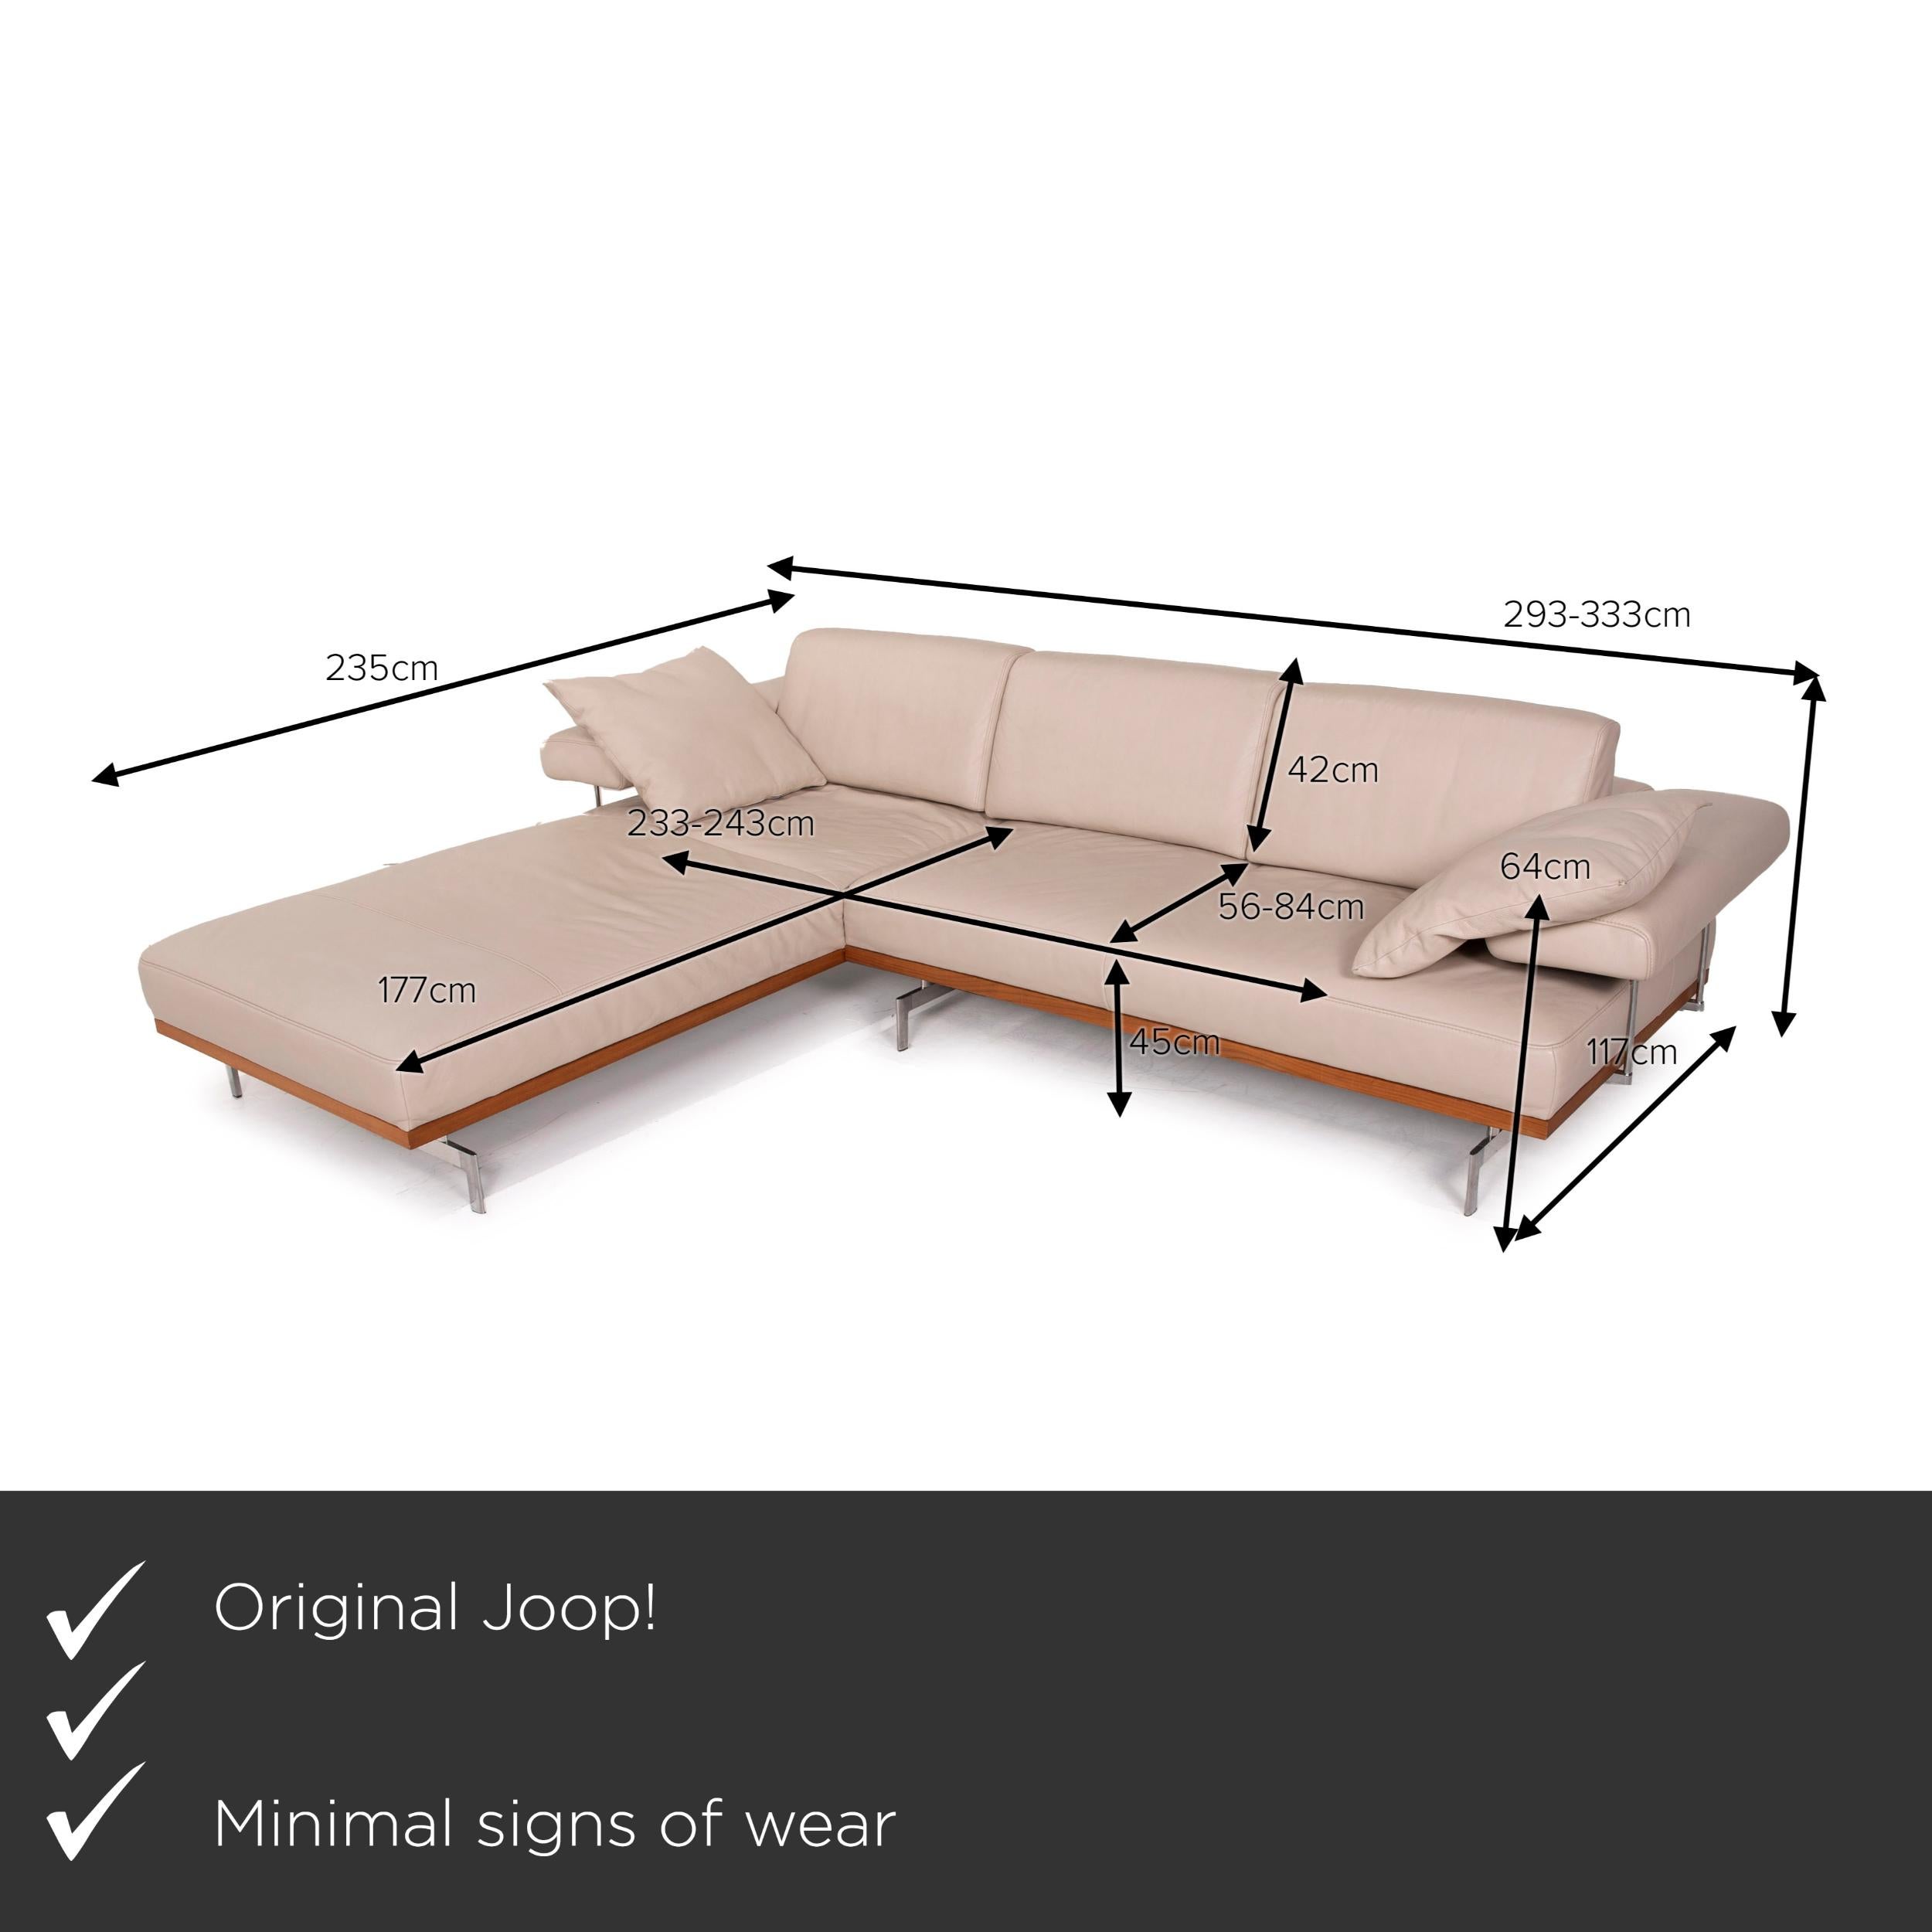 We present to you a Joop! 24/7 leather sofa cream corner sofa function.


 Product measurements in centimeters:
 

Depth: 293
Width: 235
Height: 82
Seat height: 45
Rest height: 64
Seat depth: 177
Seat width: 233
Back height: 42.
 